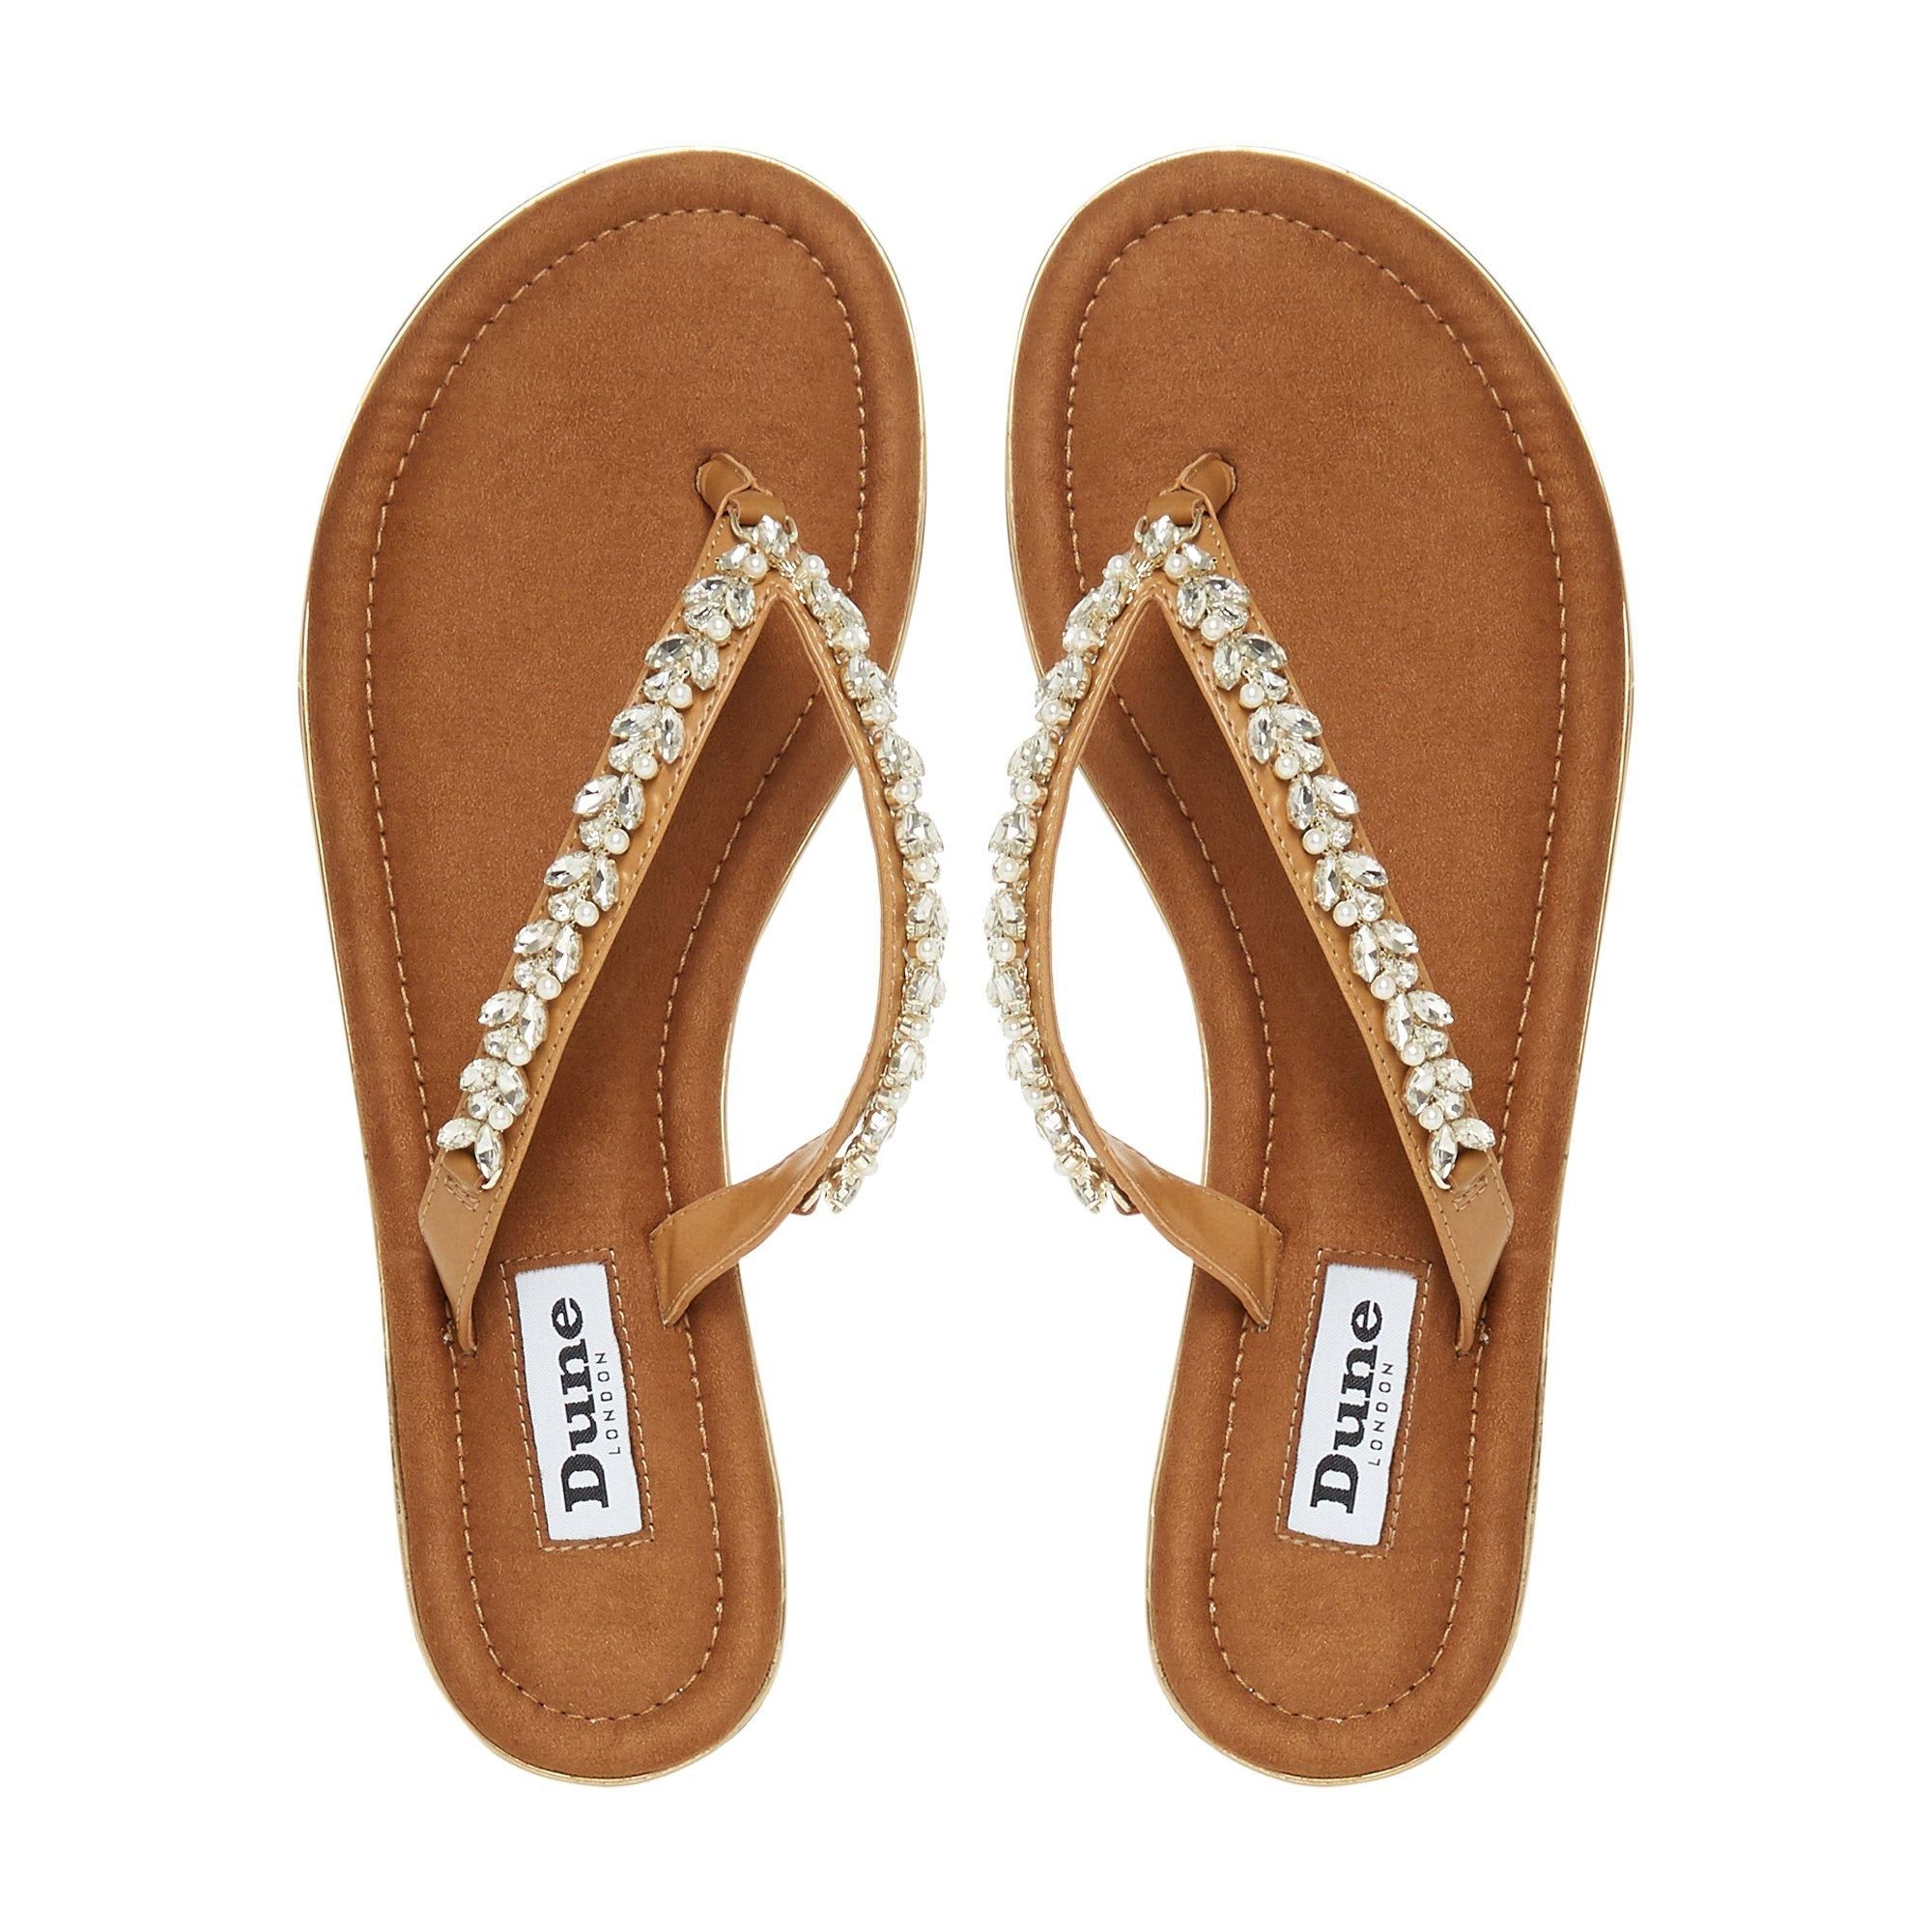 The Newbeys sandal will become your daily companion in the summer months. Fitted with a jewel-embossed toe post for a hint of glamour. It's finished with a shimmering contrasting rim at the sole.